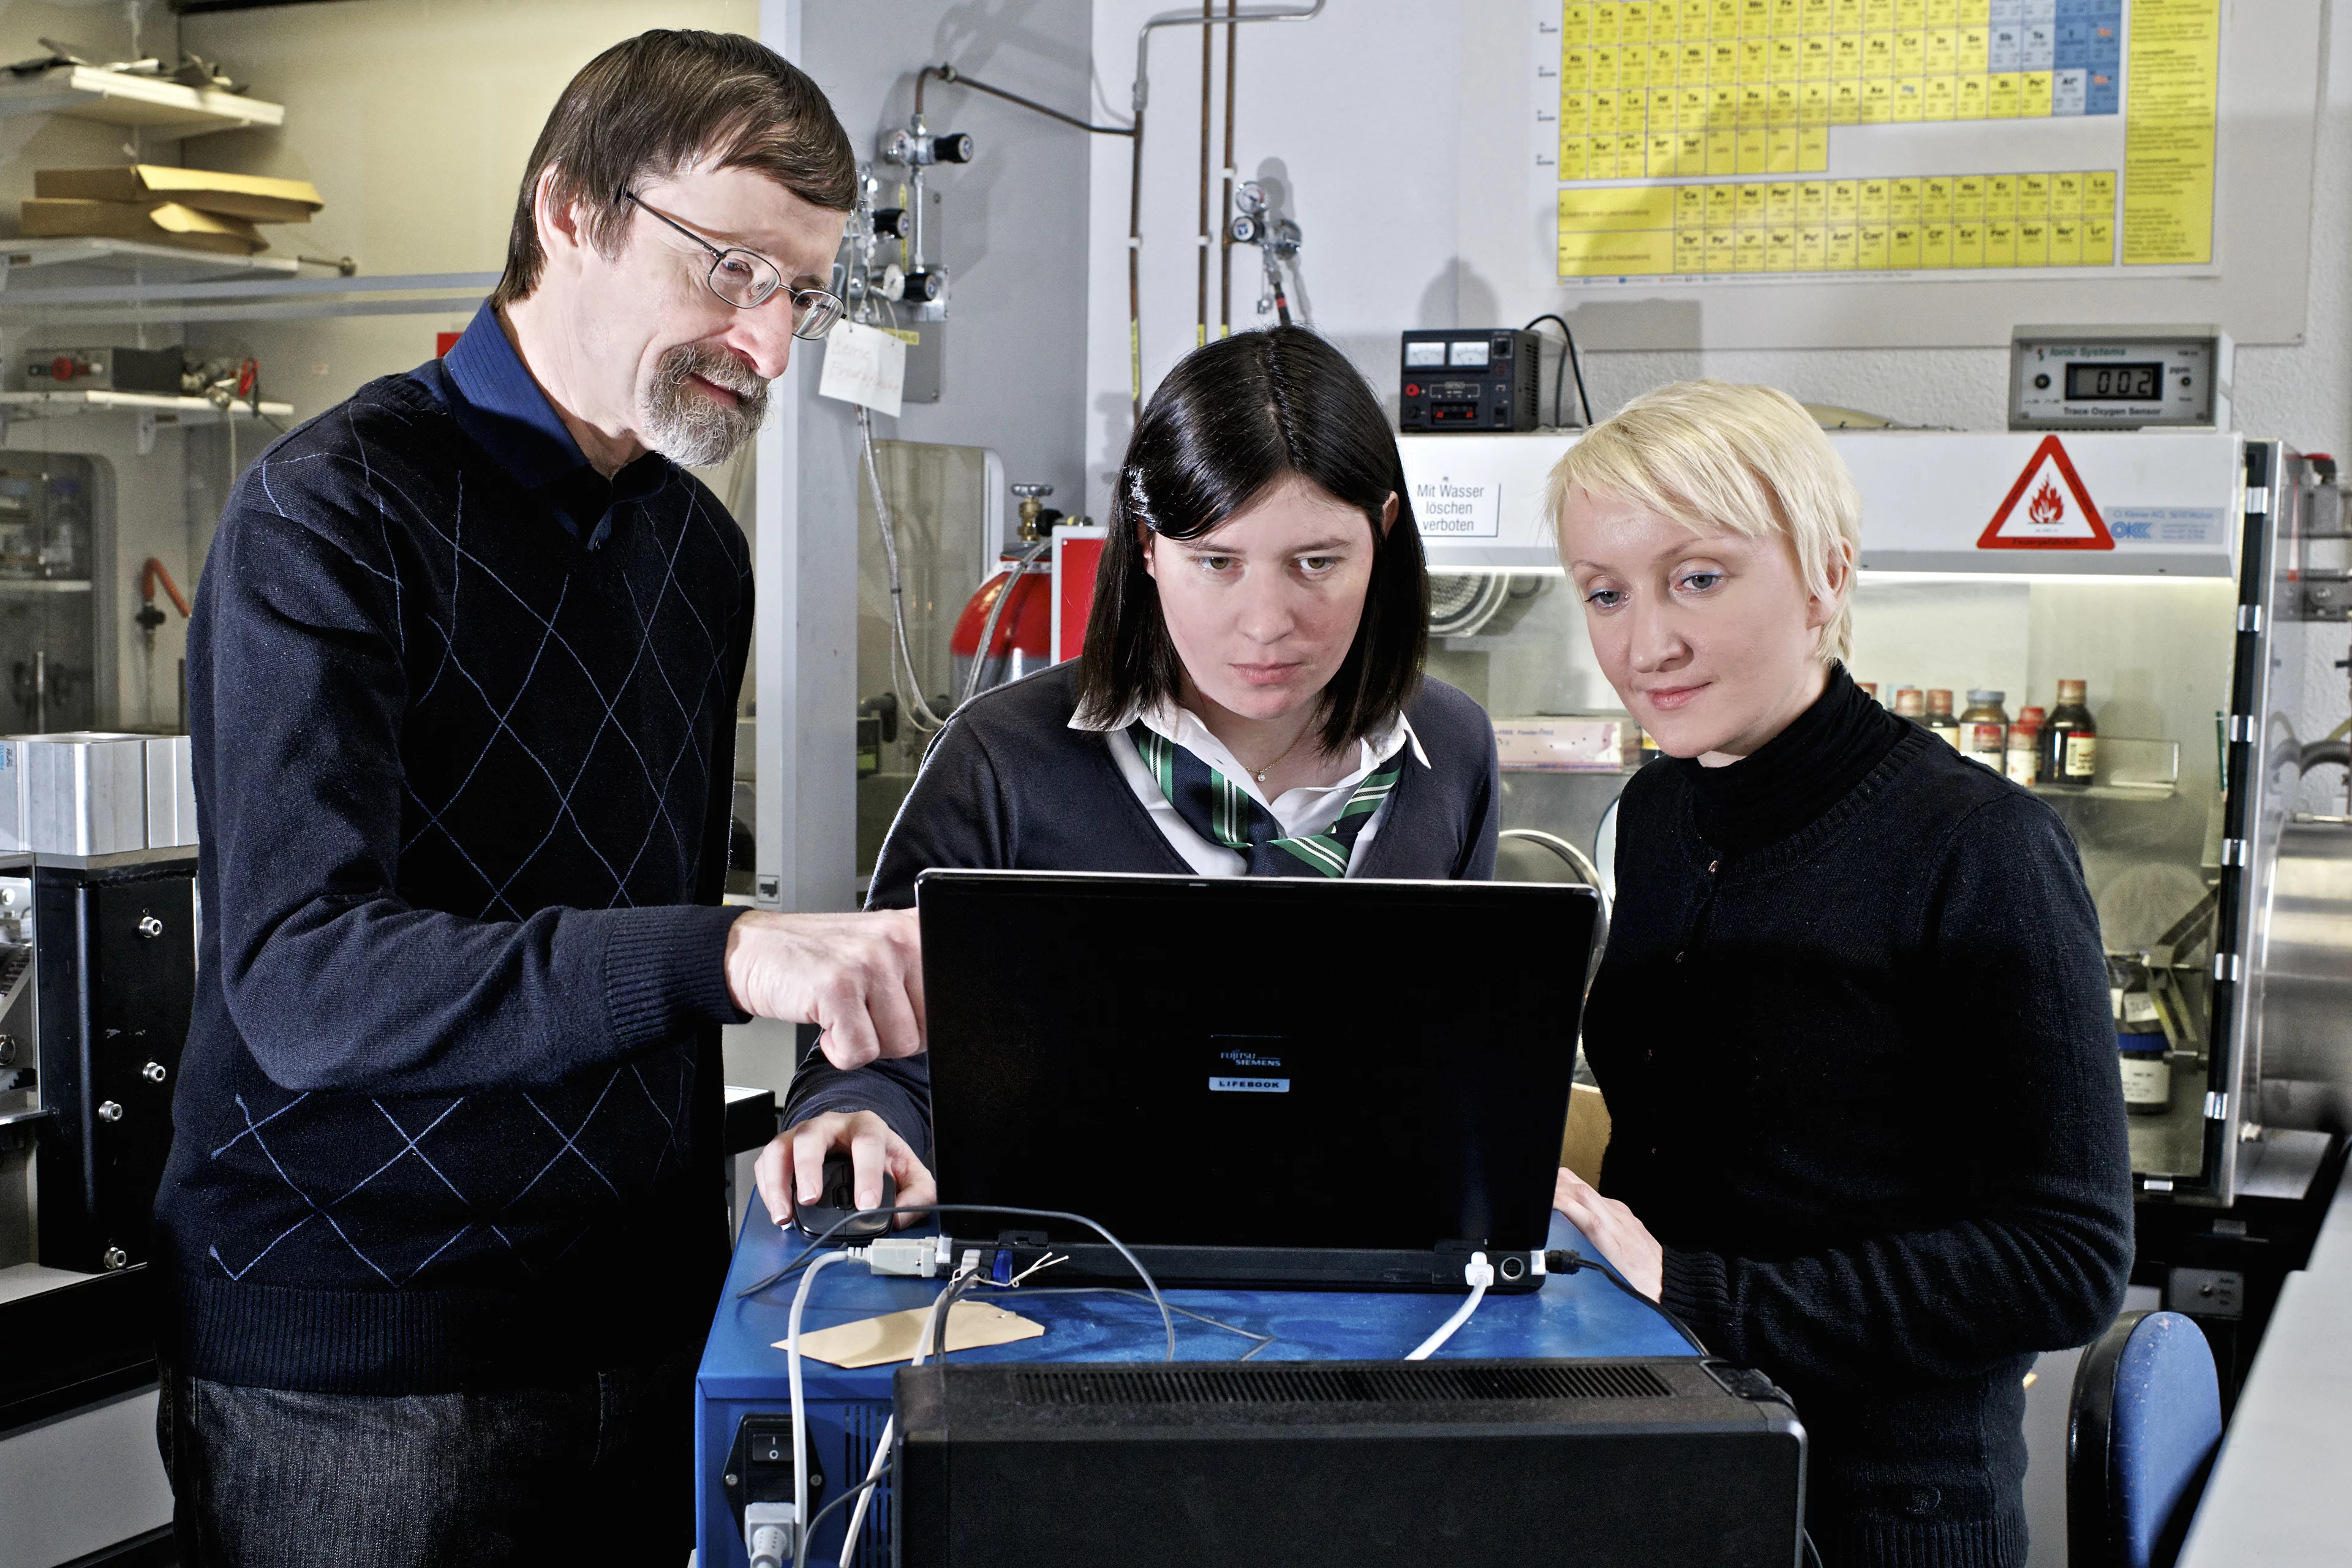 The scientists from the Electrochemical Energy Storage Section who are participating in the development of lithium-sulfur batteries: (from left to right) Head of the Section Petr Novák, Project Manager Claire Camille Villevieille and Scientific Officer Sigita Urbonaite. Source: Markus Fischer/Paul Scherrer Institute